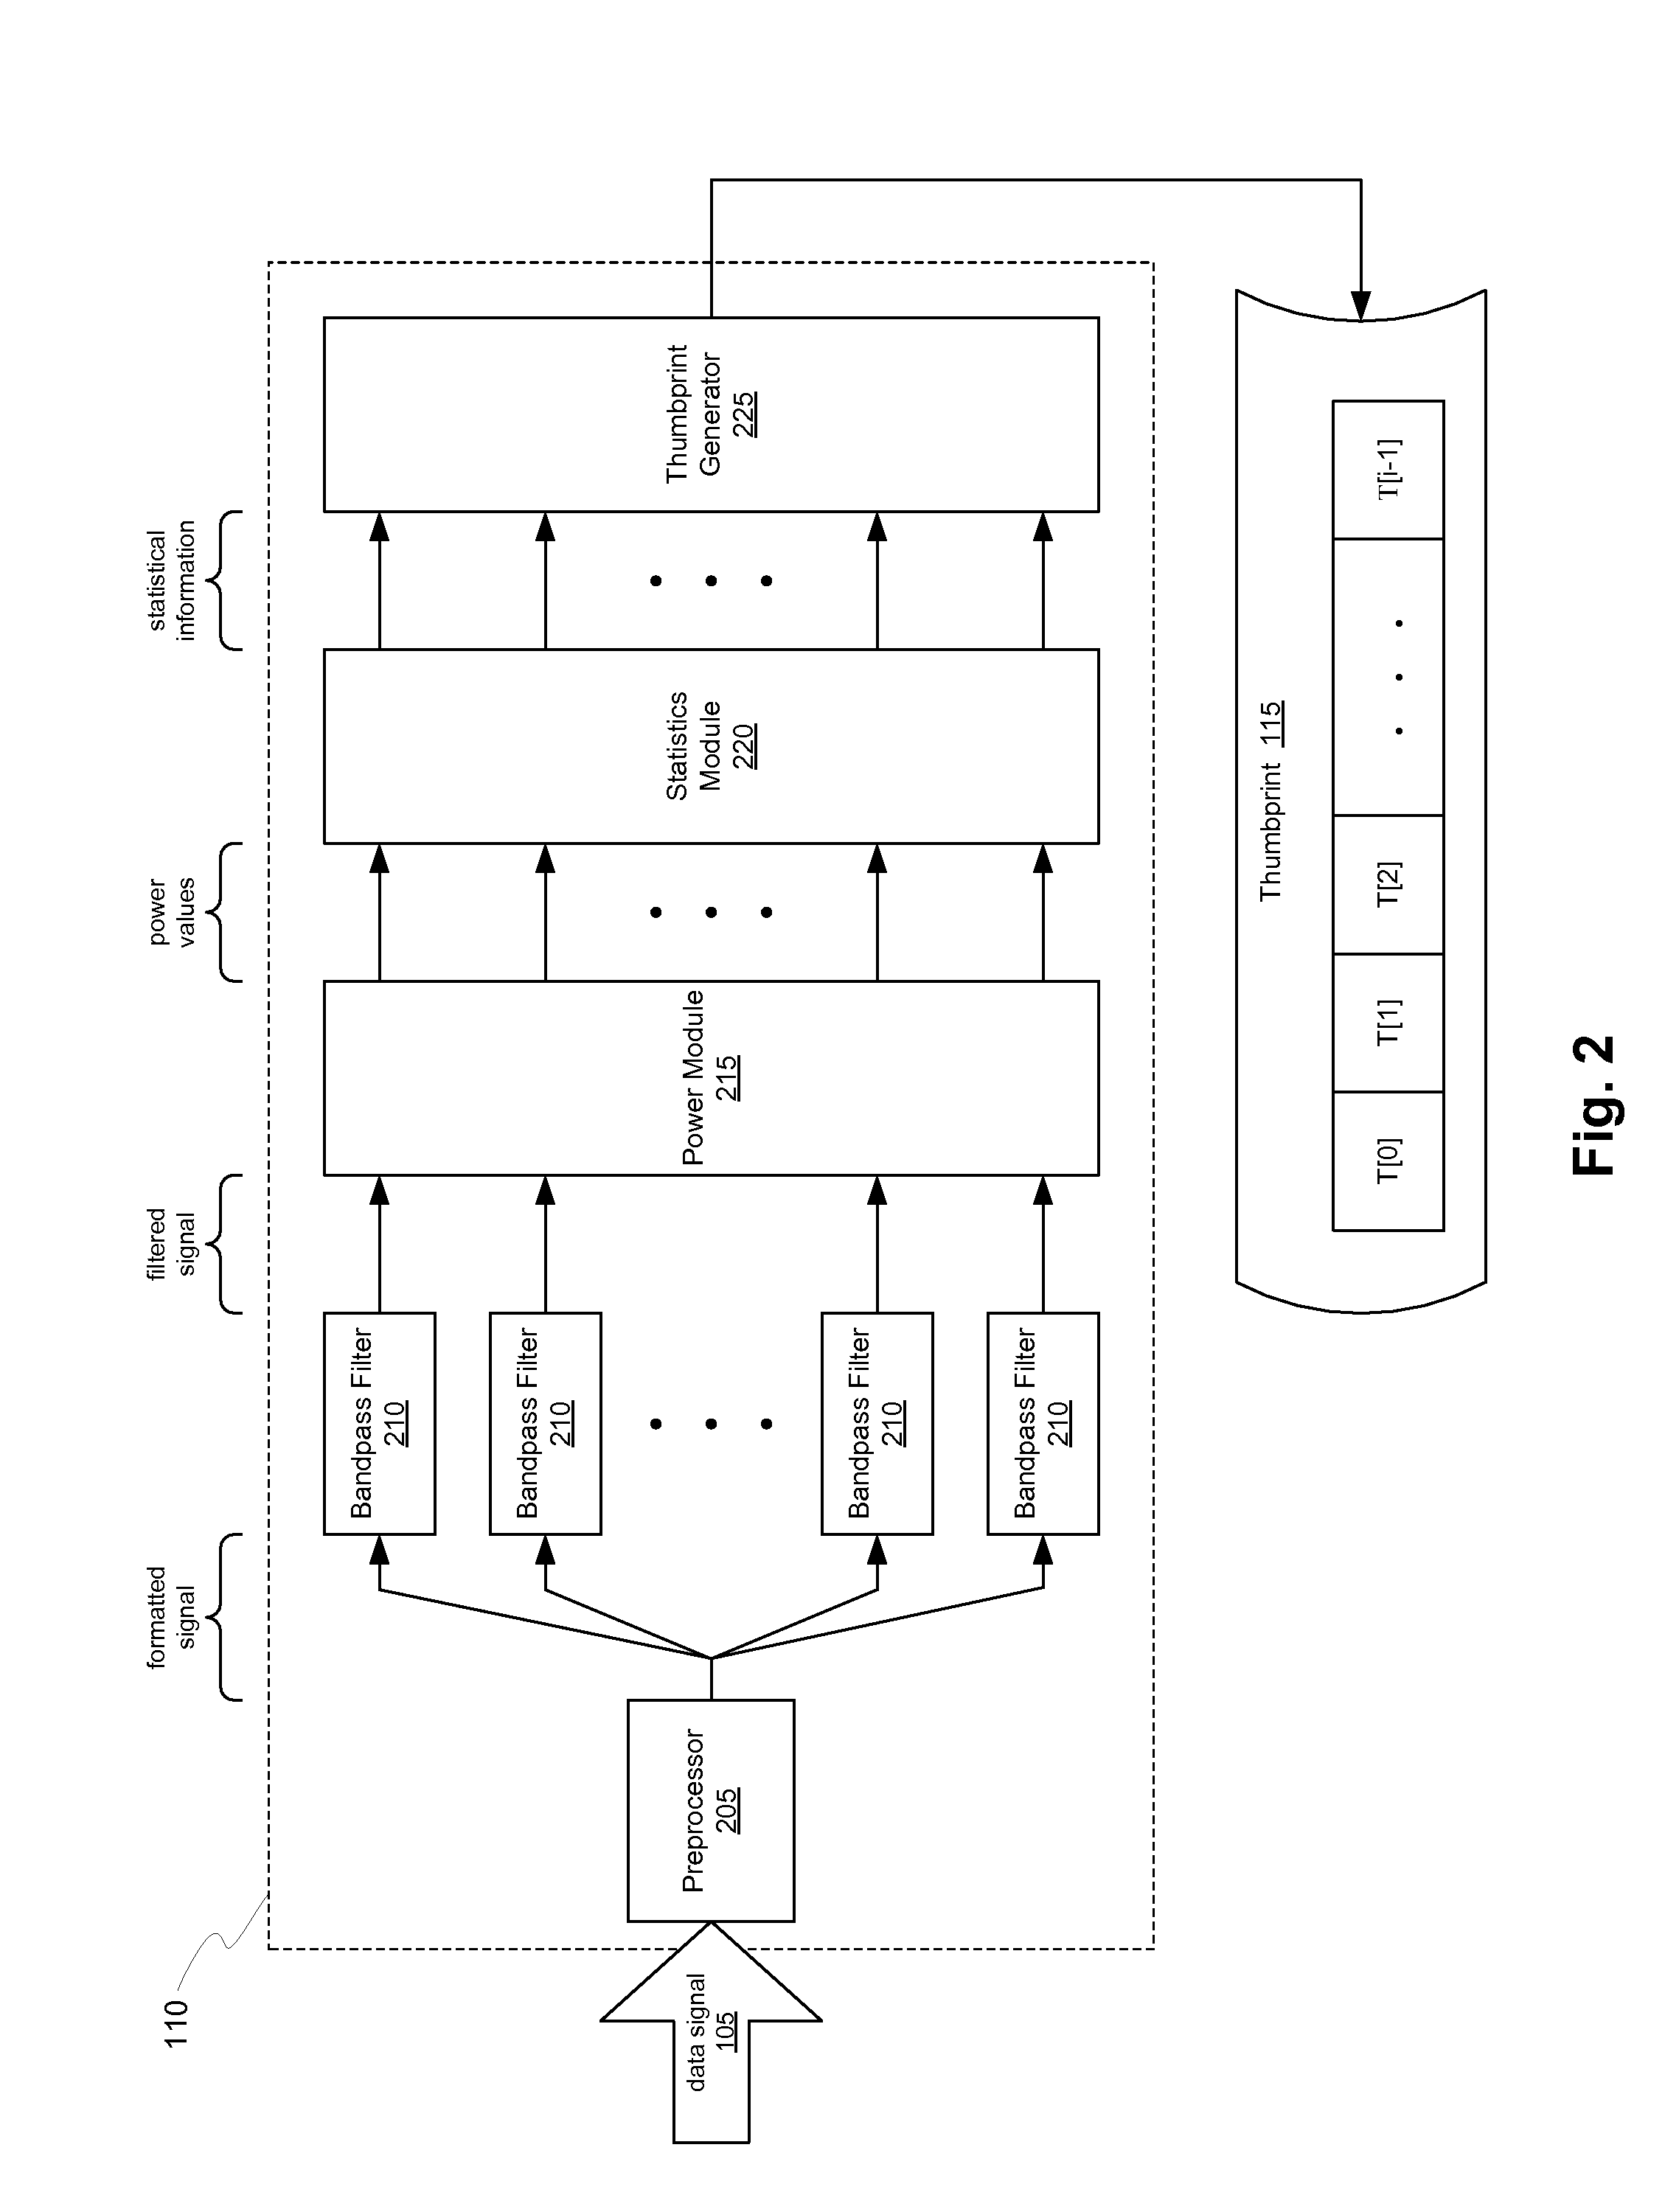 Comparison of Data Signals Using Characteristic Electronic Thumbprints Extracted Therefrom